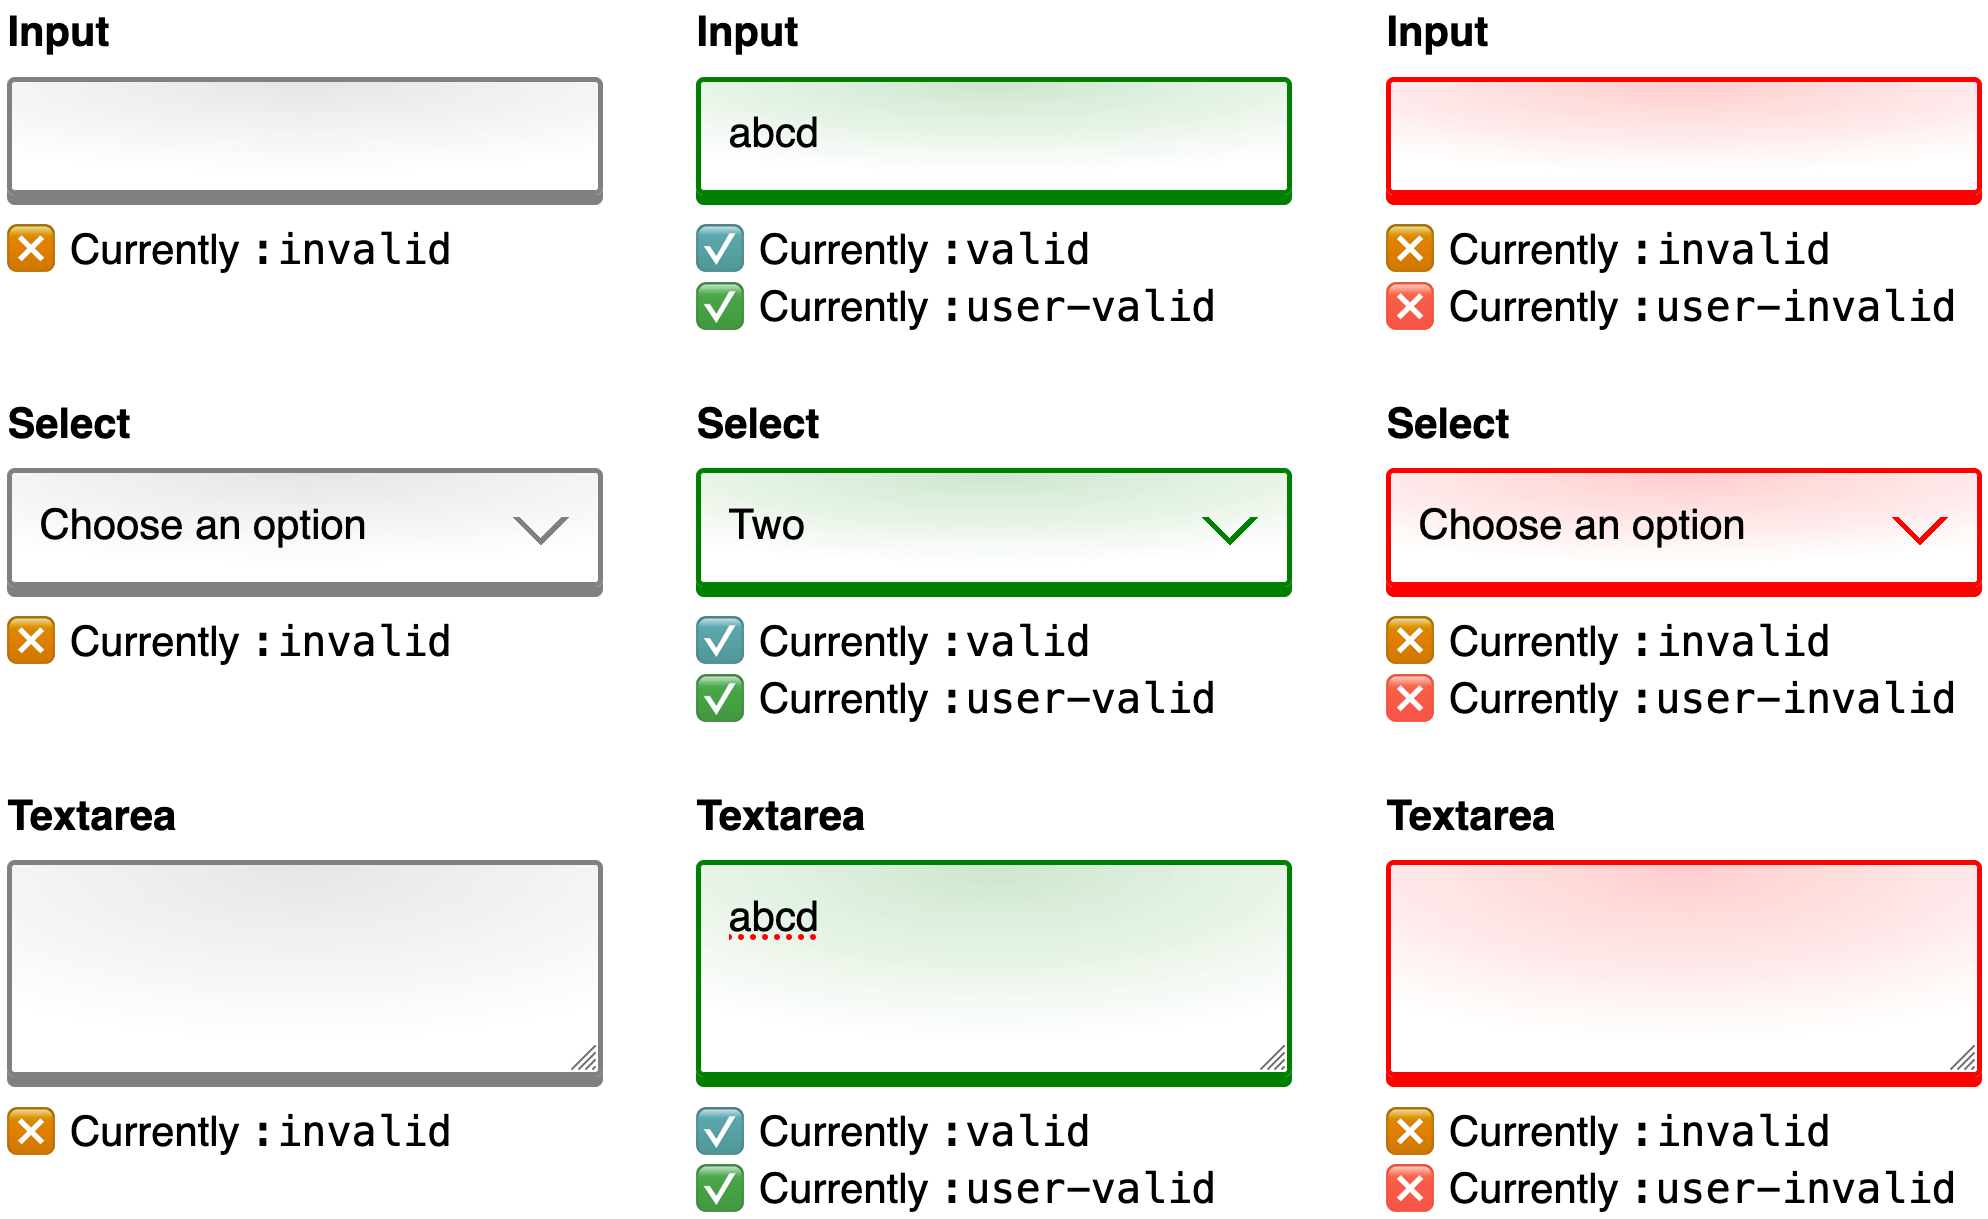 An image that combines 3 screenshots side by side for comparison. Each screenshot shows a web form with the same input, select, and textarea controls. The first screenshot shows the form in its initial state before any user input. The control borders are gray and the help text below explains that each control will currently match the :invalid pseudo-class selector. The second screenshot shows the same form after a user has provided input for each control. The control borders are green and the help text below explains that each control will currently match both the :valid and :user-valid pseudo-class selectors. The third and final screenshot shows the same form after a user has removed all of their input. The control borders are red and the help text below explains that each control will currently match both the :invalid and :user-invalid pseudo-class selectors.